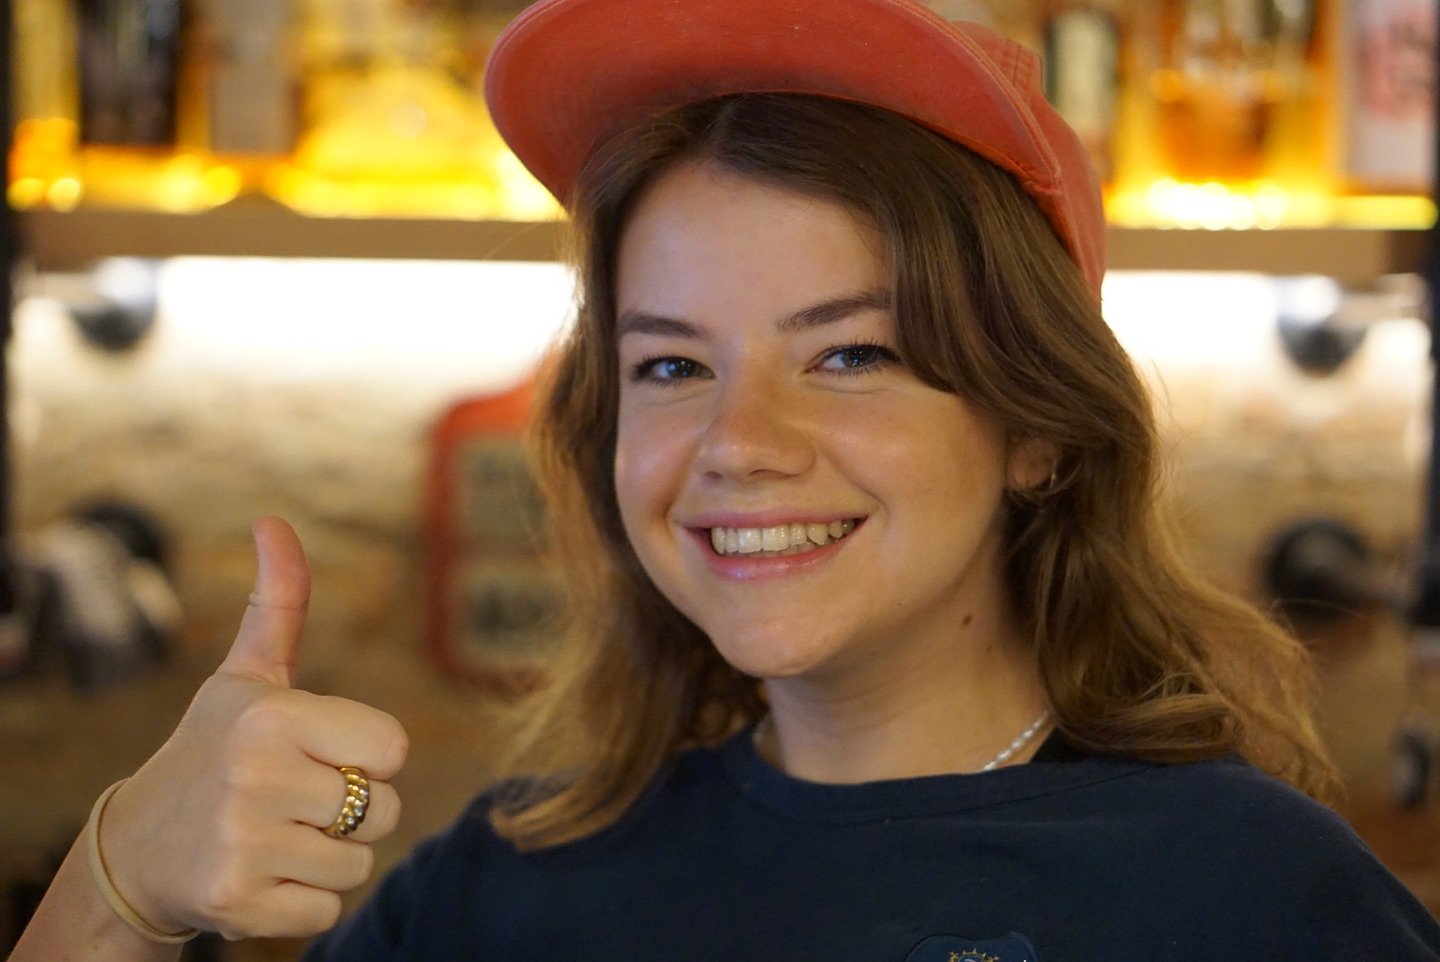 Thumbs up for 𝐓𝐮𝐞𝐬𝐝𝐚𝐲 𝐓𝐫𝐢𝐯𝐢𝐚 and it&rsquo;s ON tonight!

Trivia from 7pm! Get in from 4-6 for Hoppy Hour. Doors open at 4pm.

Anyone can win some beers, beer tabs and impress your mates with your general knowledge💥🧠